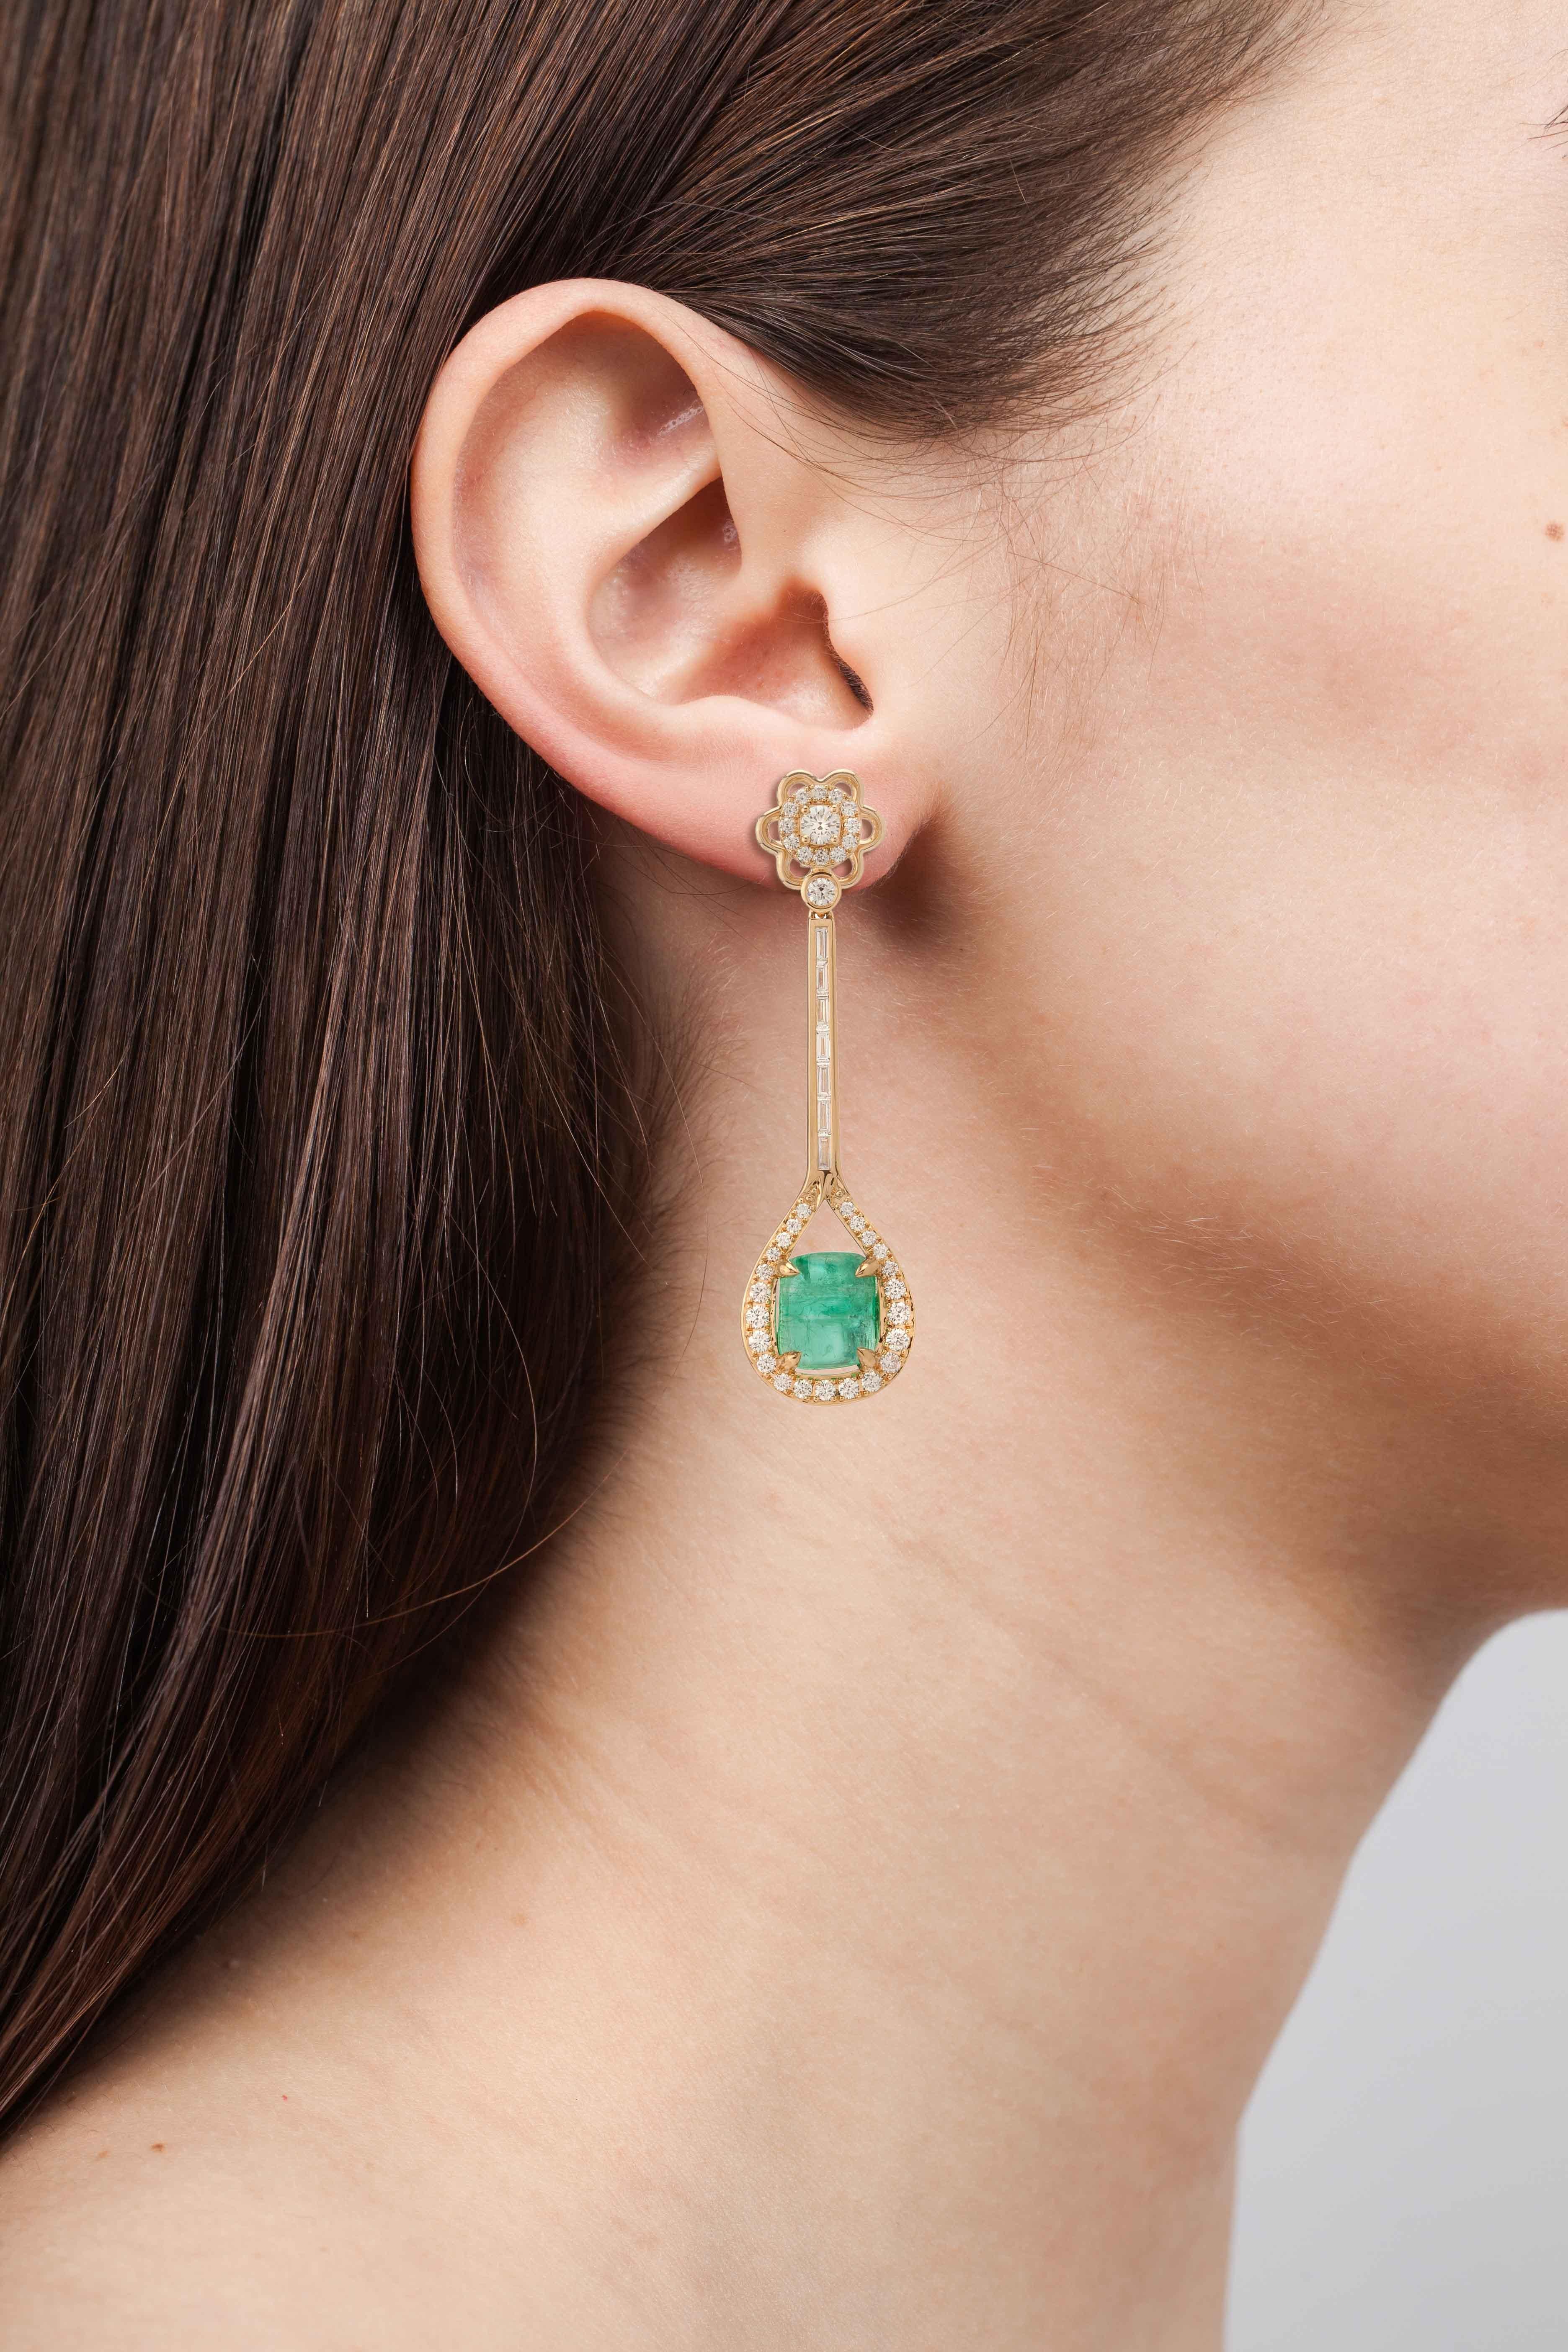 Muzo Emerald Colombia Heritage Verity Earrings set with 13.41 carats Emerald

Verity is a tribute to the trade between the Spaniards and Indian Maharajahs, two unique cultures that share a passion for gilded treasures and precious emerald gemstones.